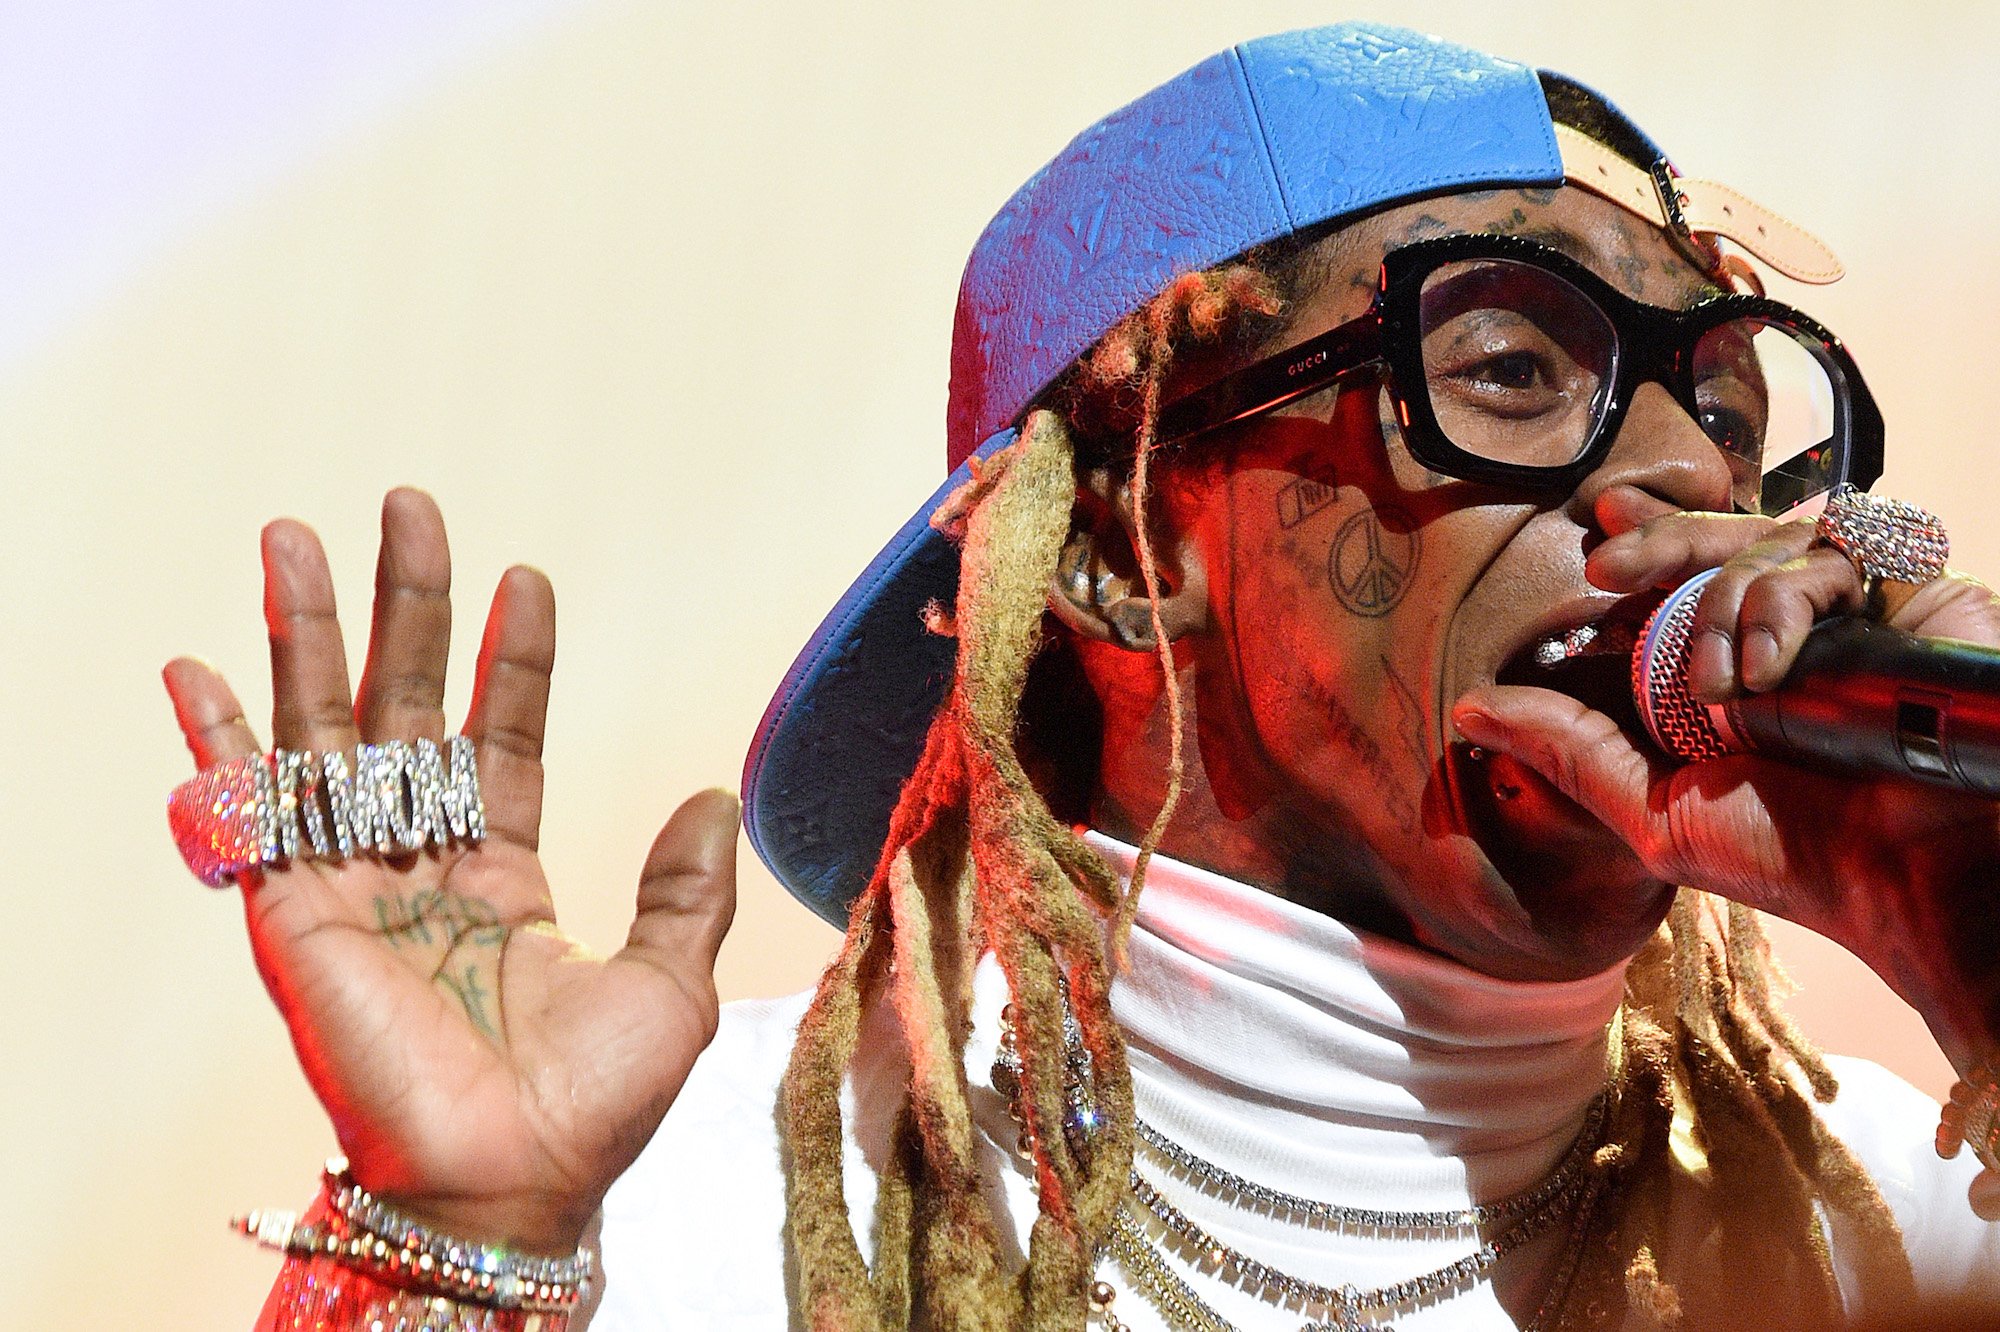 Lil' Wayne holding a microphone to his mouth, performing on stage